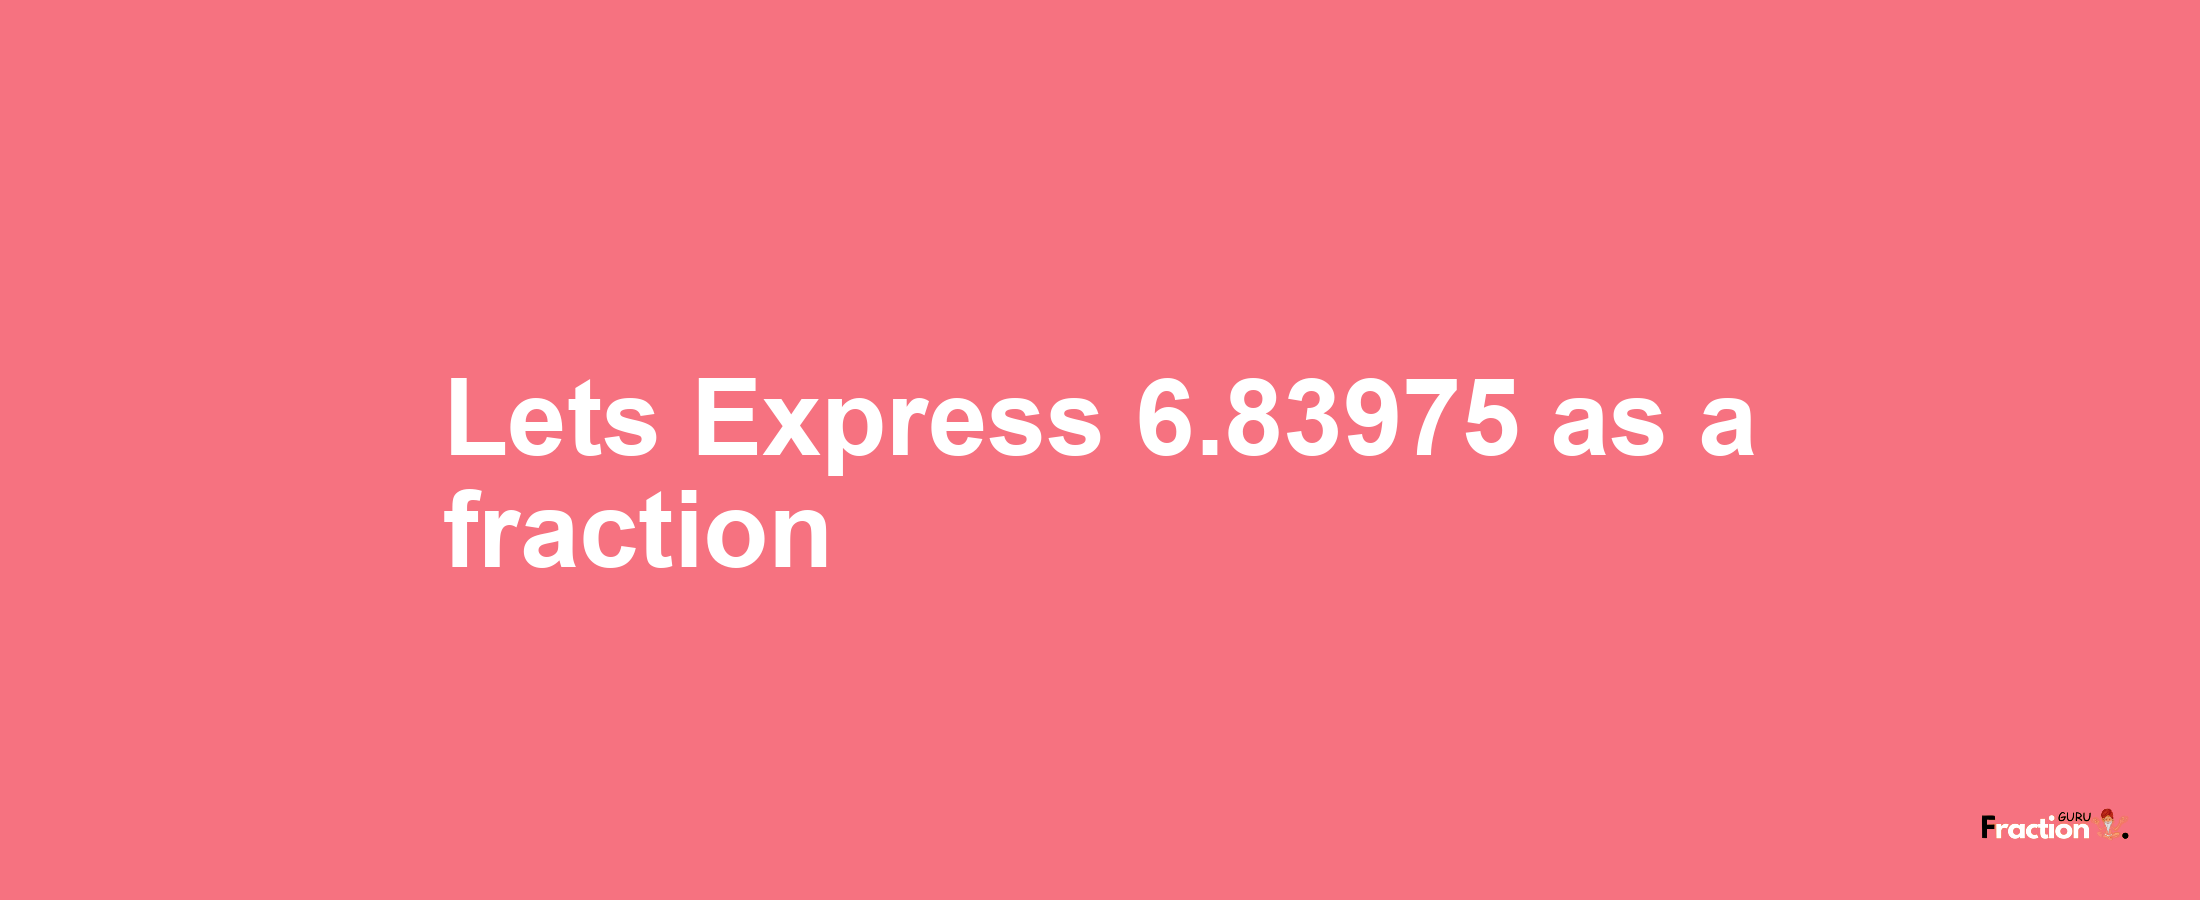 Lets Express 6.83975 as afraction